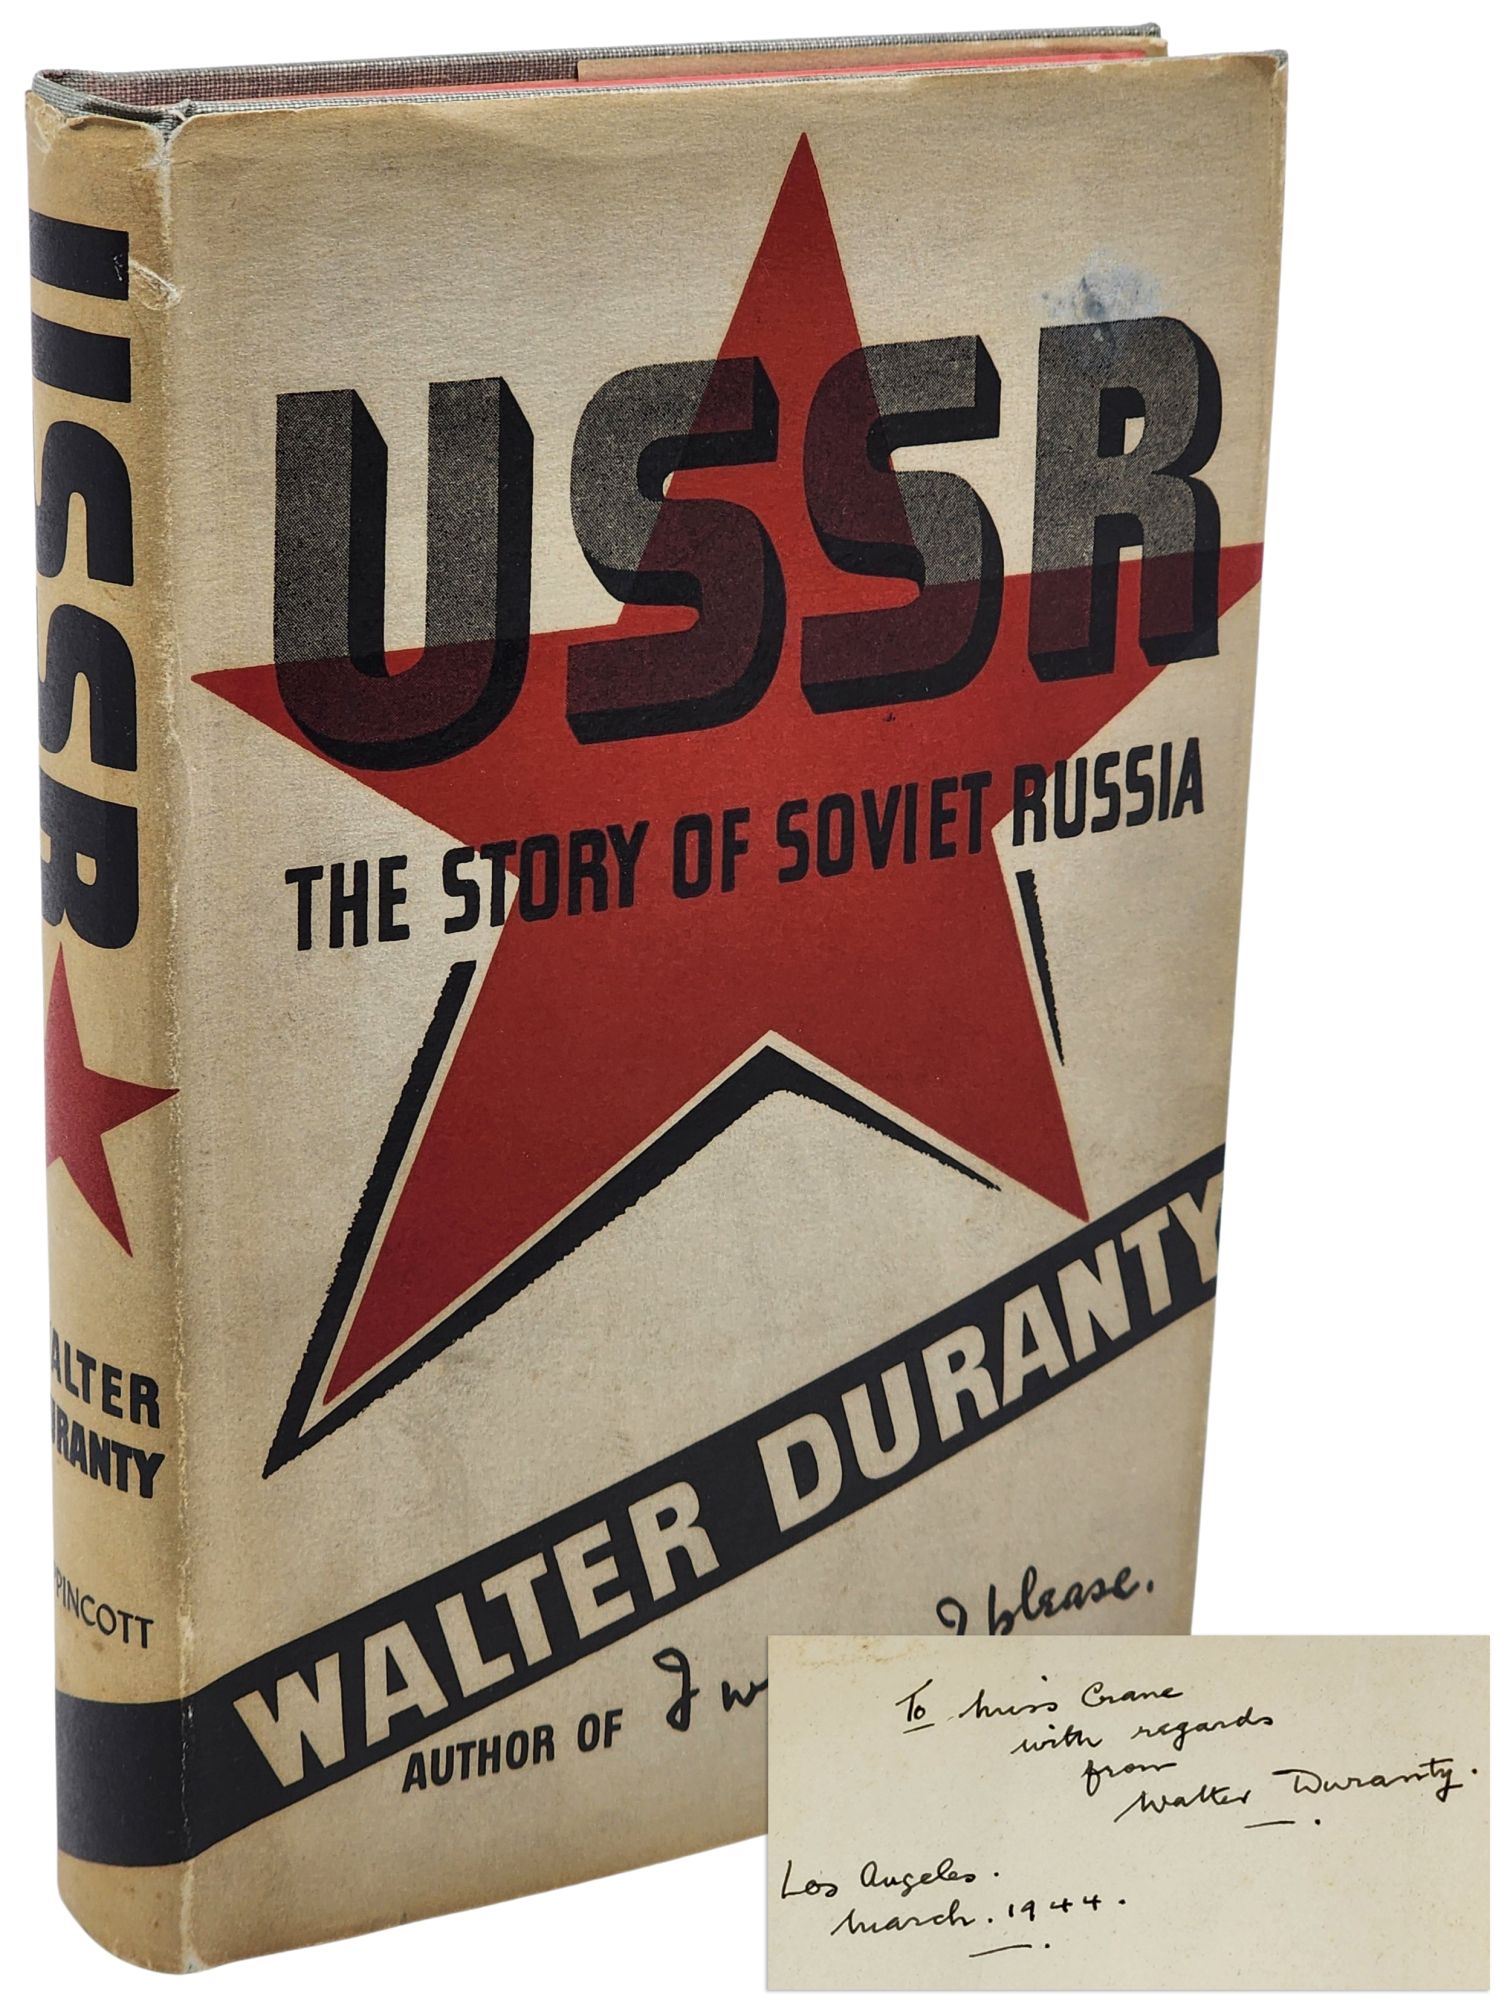 [Book #50961] USSR: THE STORY OF SOVIET RUSSIA. Walter Duranty.